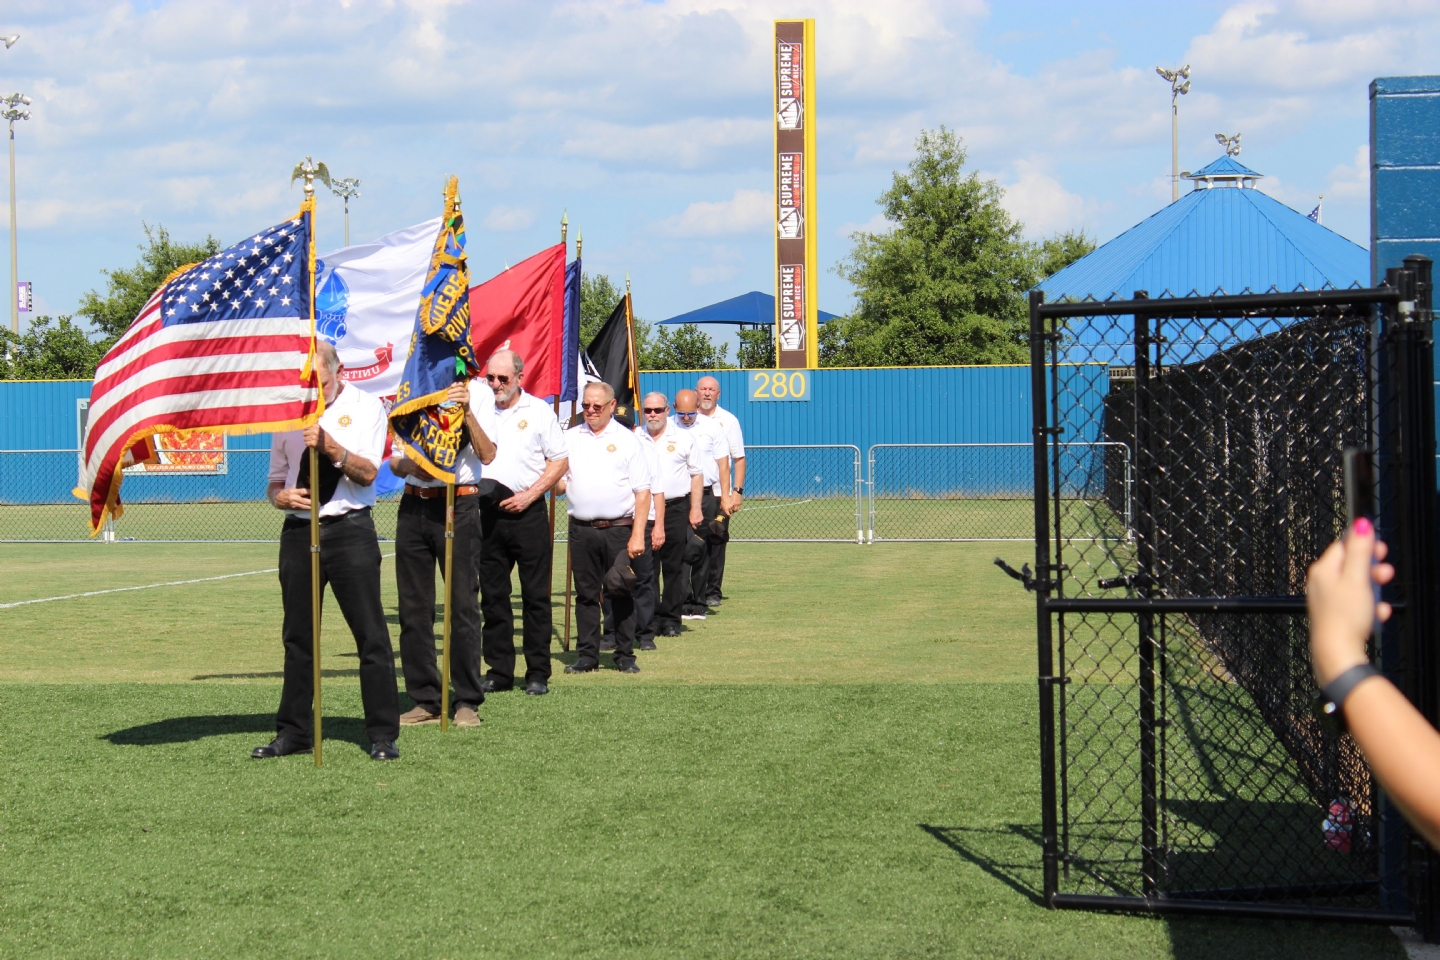 Here are a handful of photos of POST 9210 Flag Detail. This is at the Sports Complex in Youngsville.